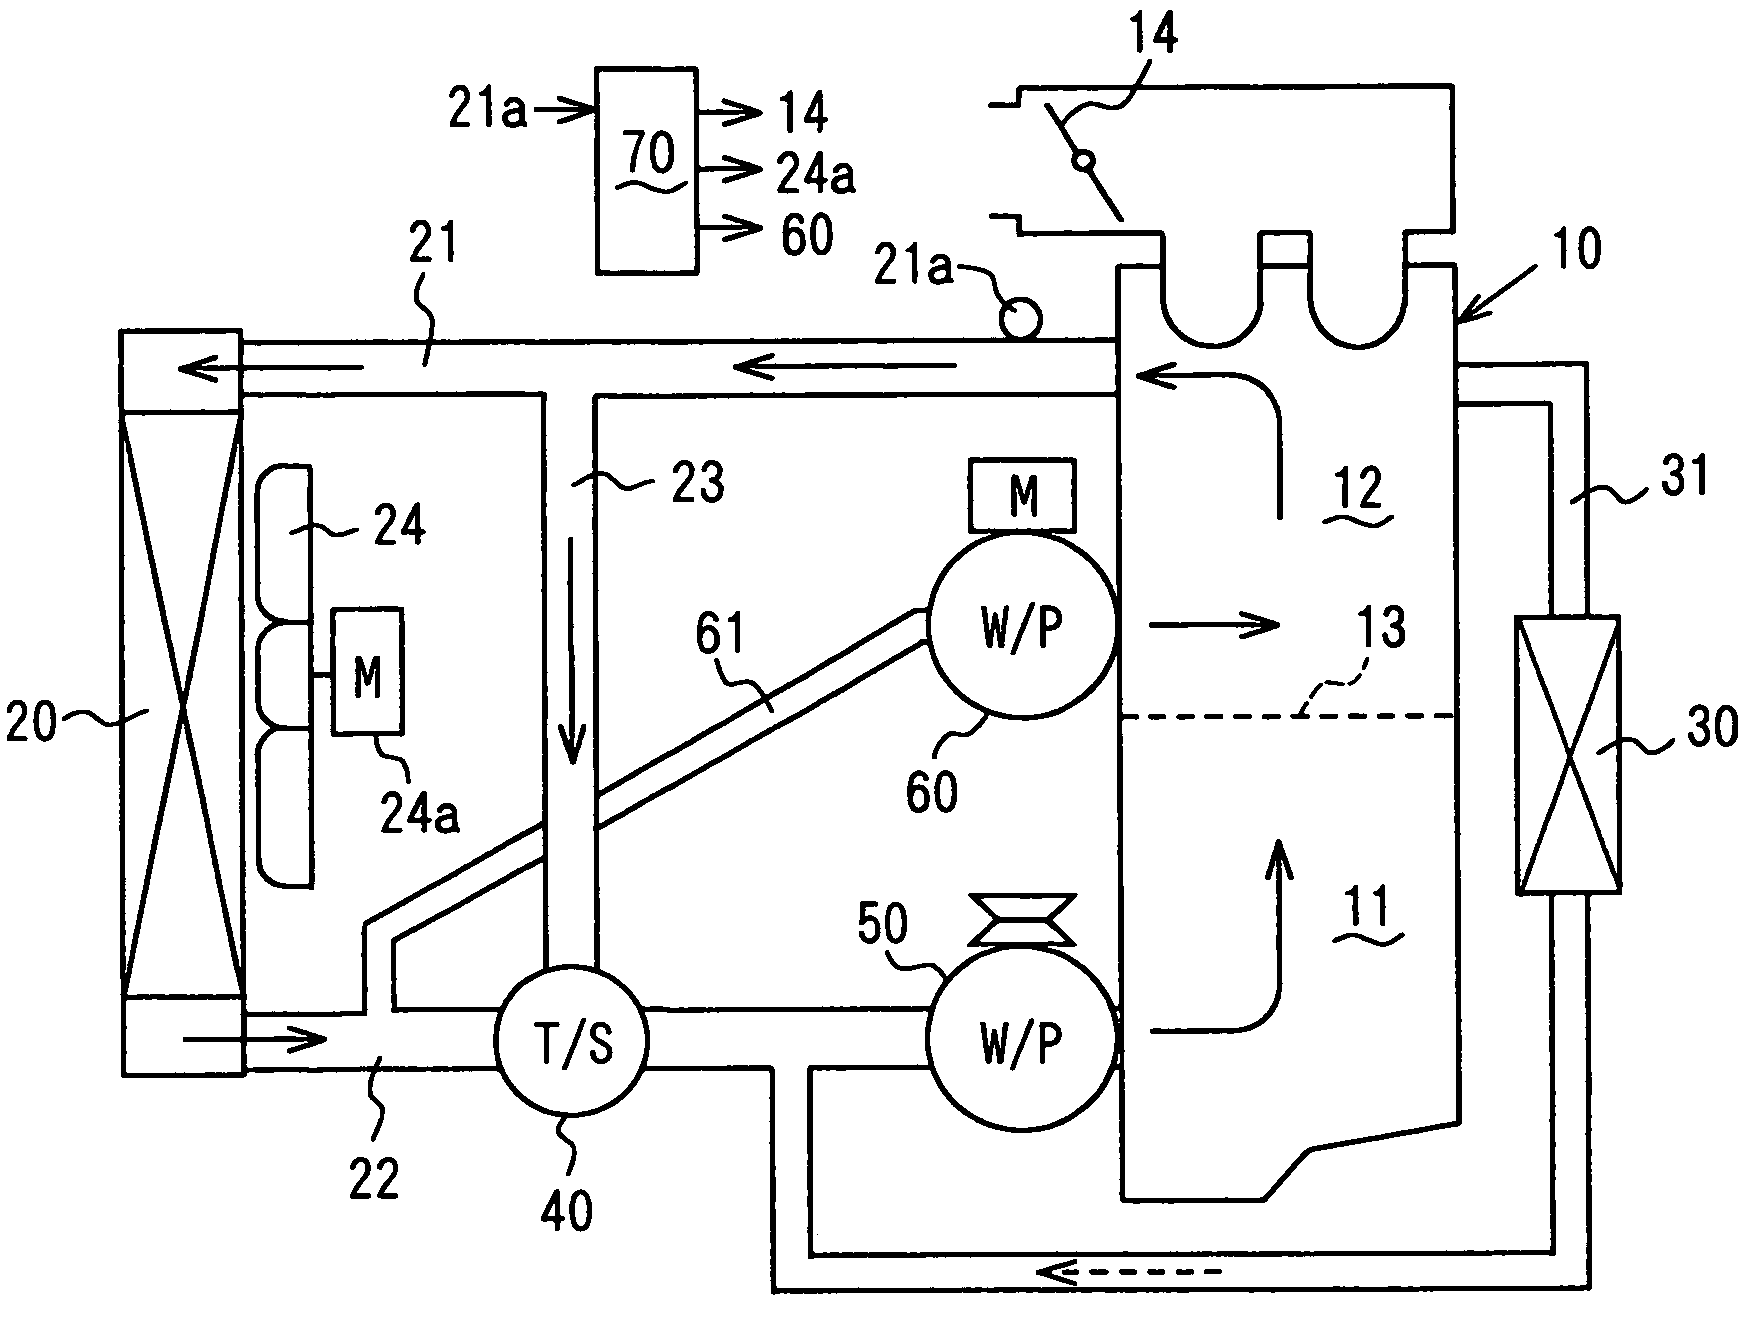 Liquid-cooling device for internal combustion engine